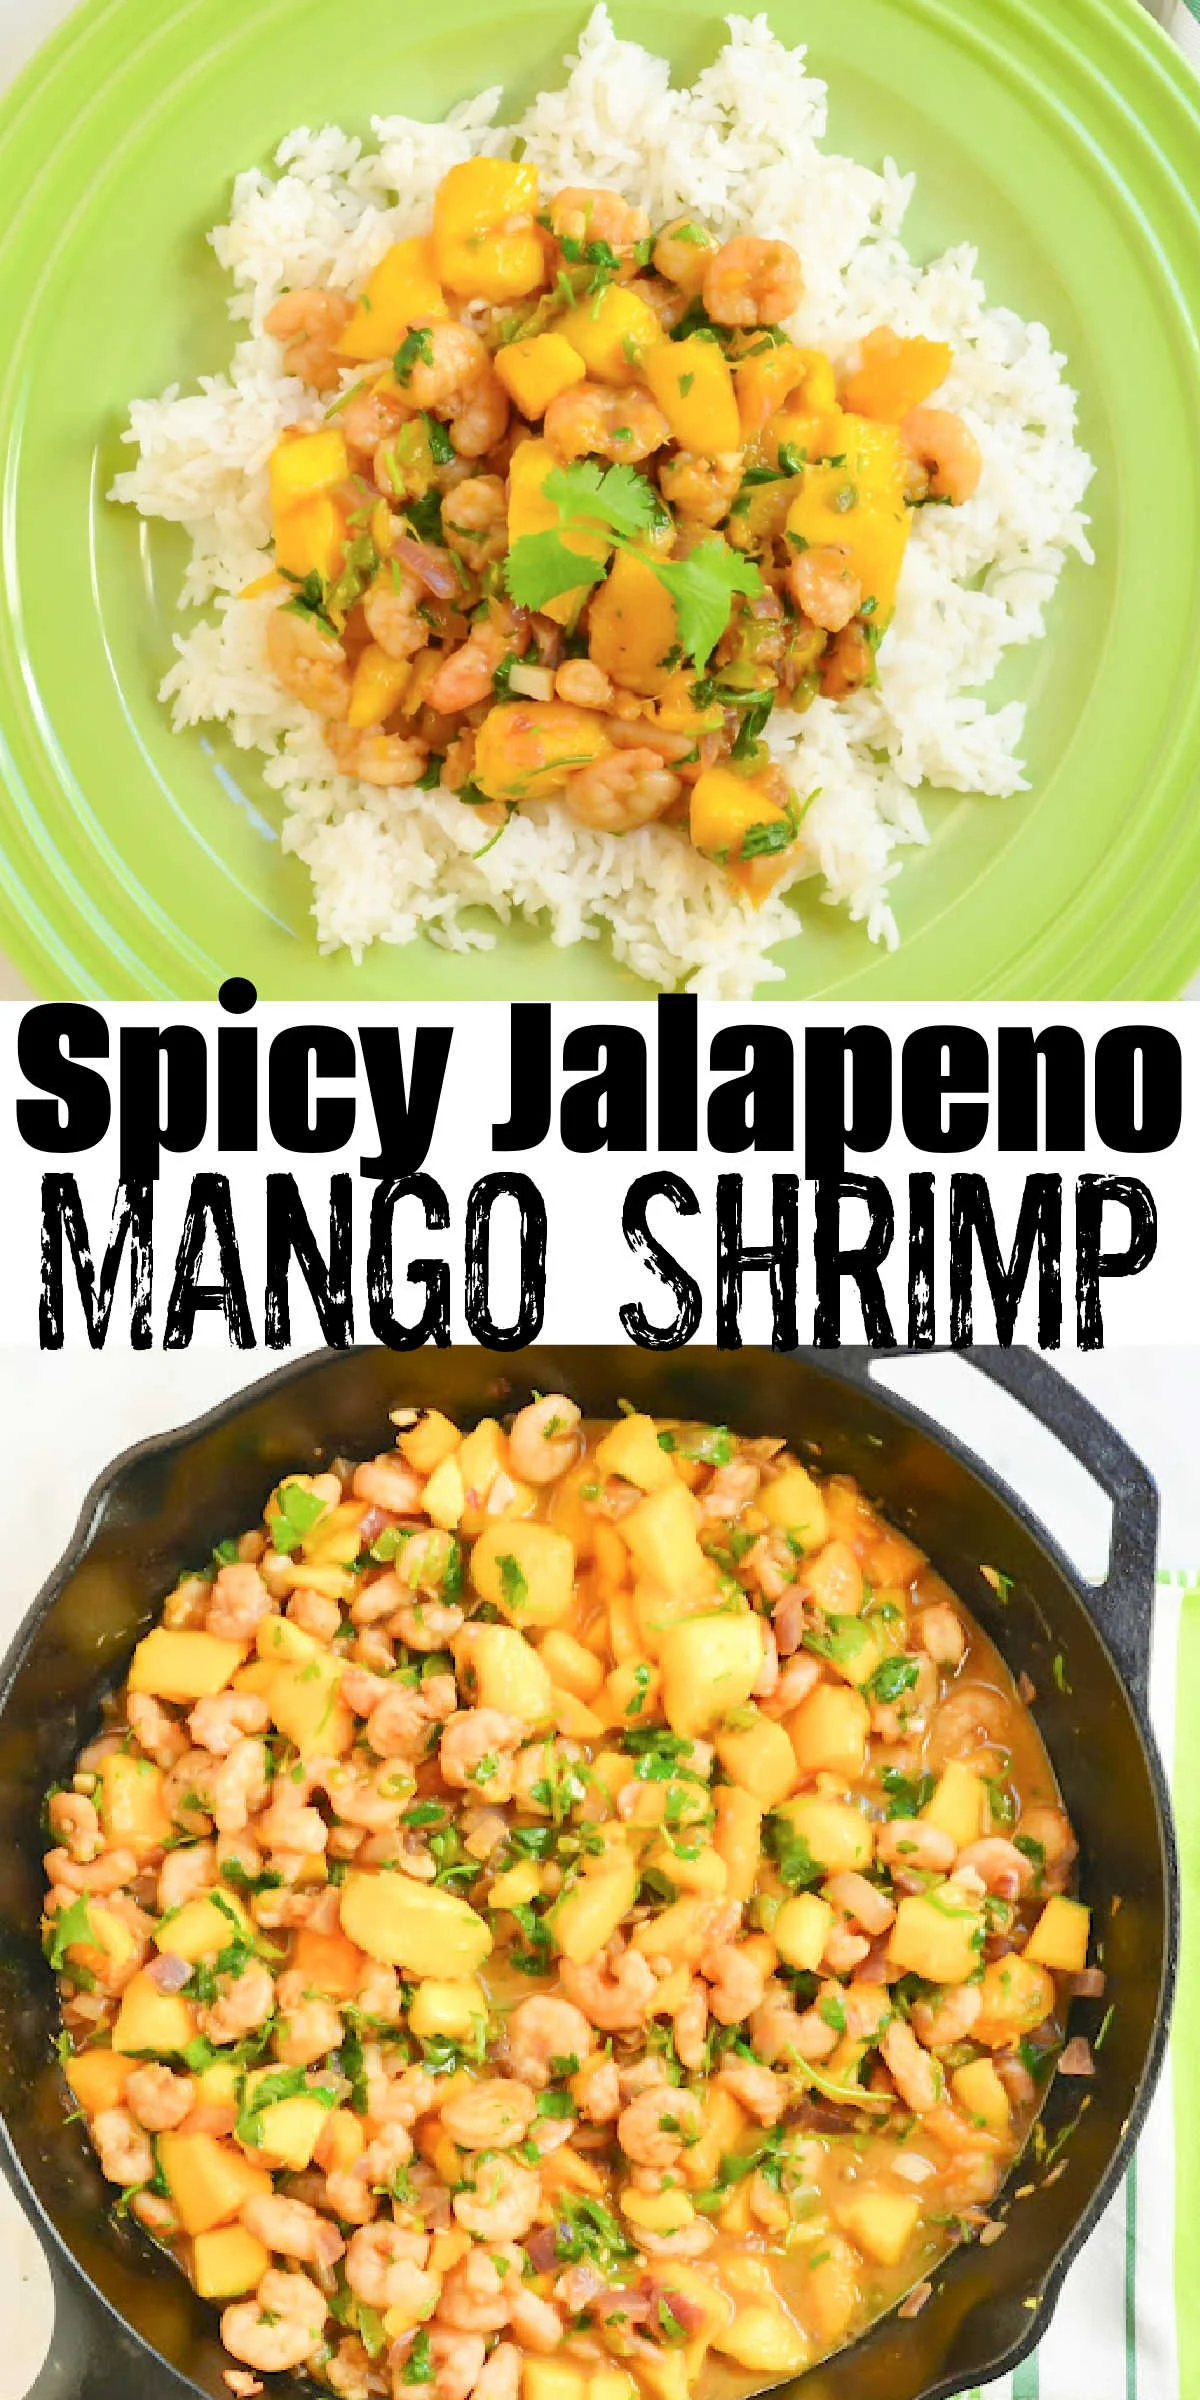 2 photos the top photo is of a plate of Mango Shrimp on a bed of rice. The bottom photo is of Spicy Jalapeno Mango Shrimp in a cast iron pan. There is a white banner between the two photos with black text Spicy Jalapeno Mango Shrimp.